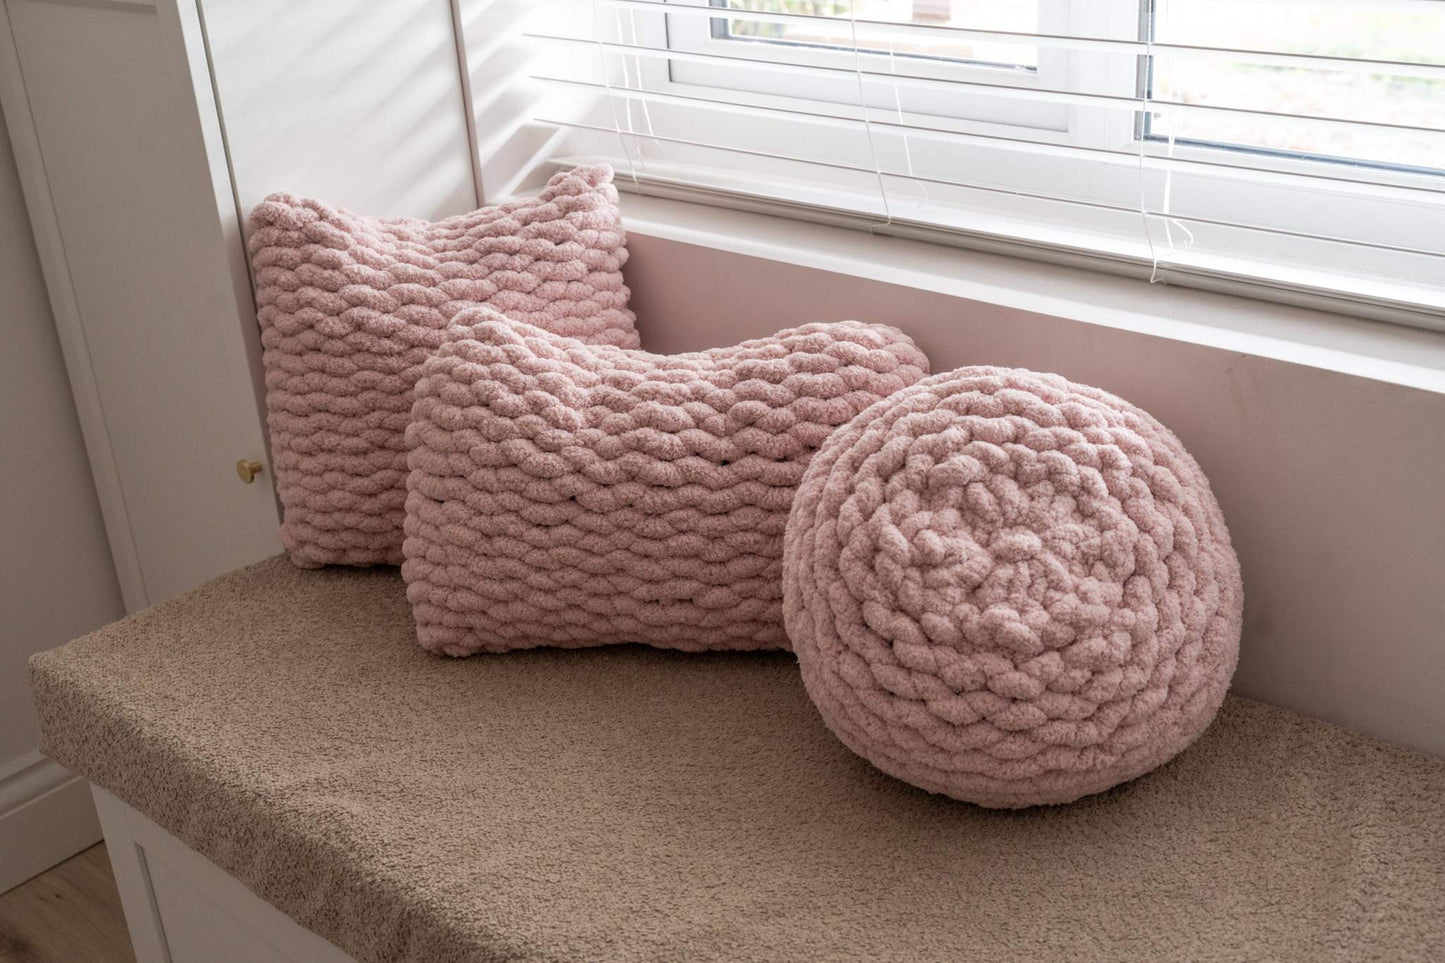 trio of pink hand knit cushions